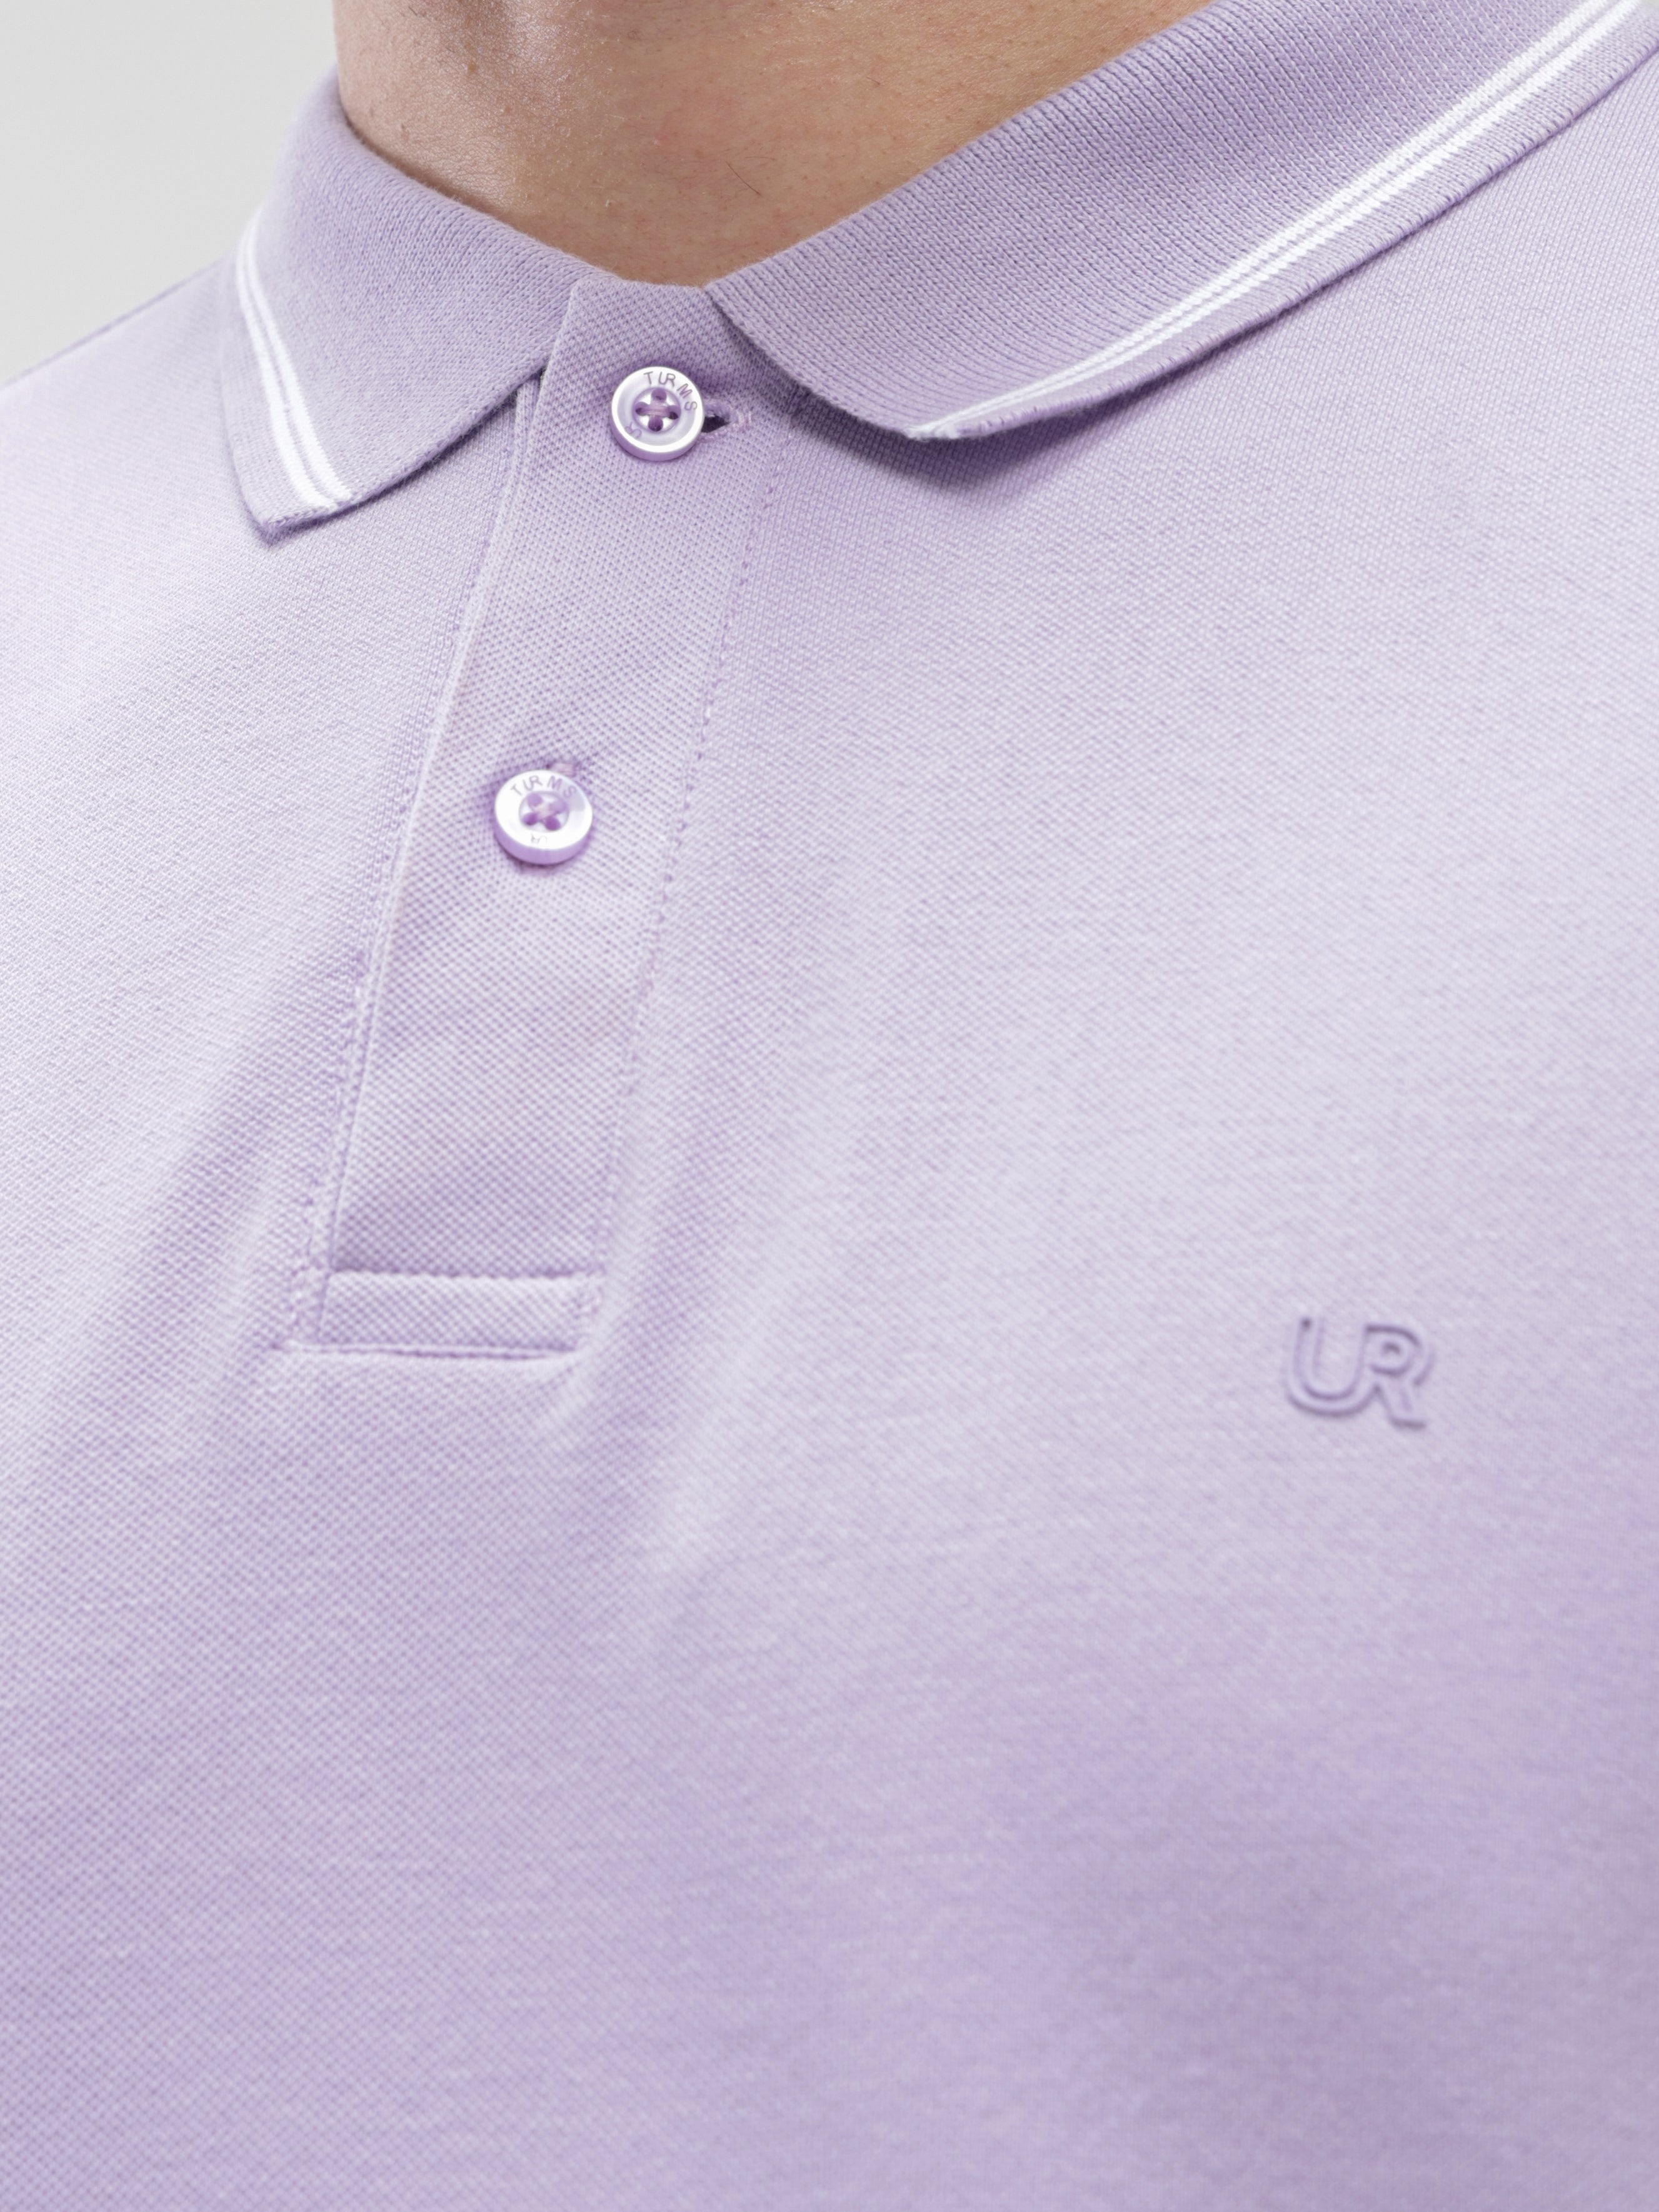 Close-up of Turms Polo T-shirt in lavender, showcasing tailored fit and premium cotton fabric. Features anti-stain, anti-odor, water-resistant properties.